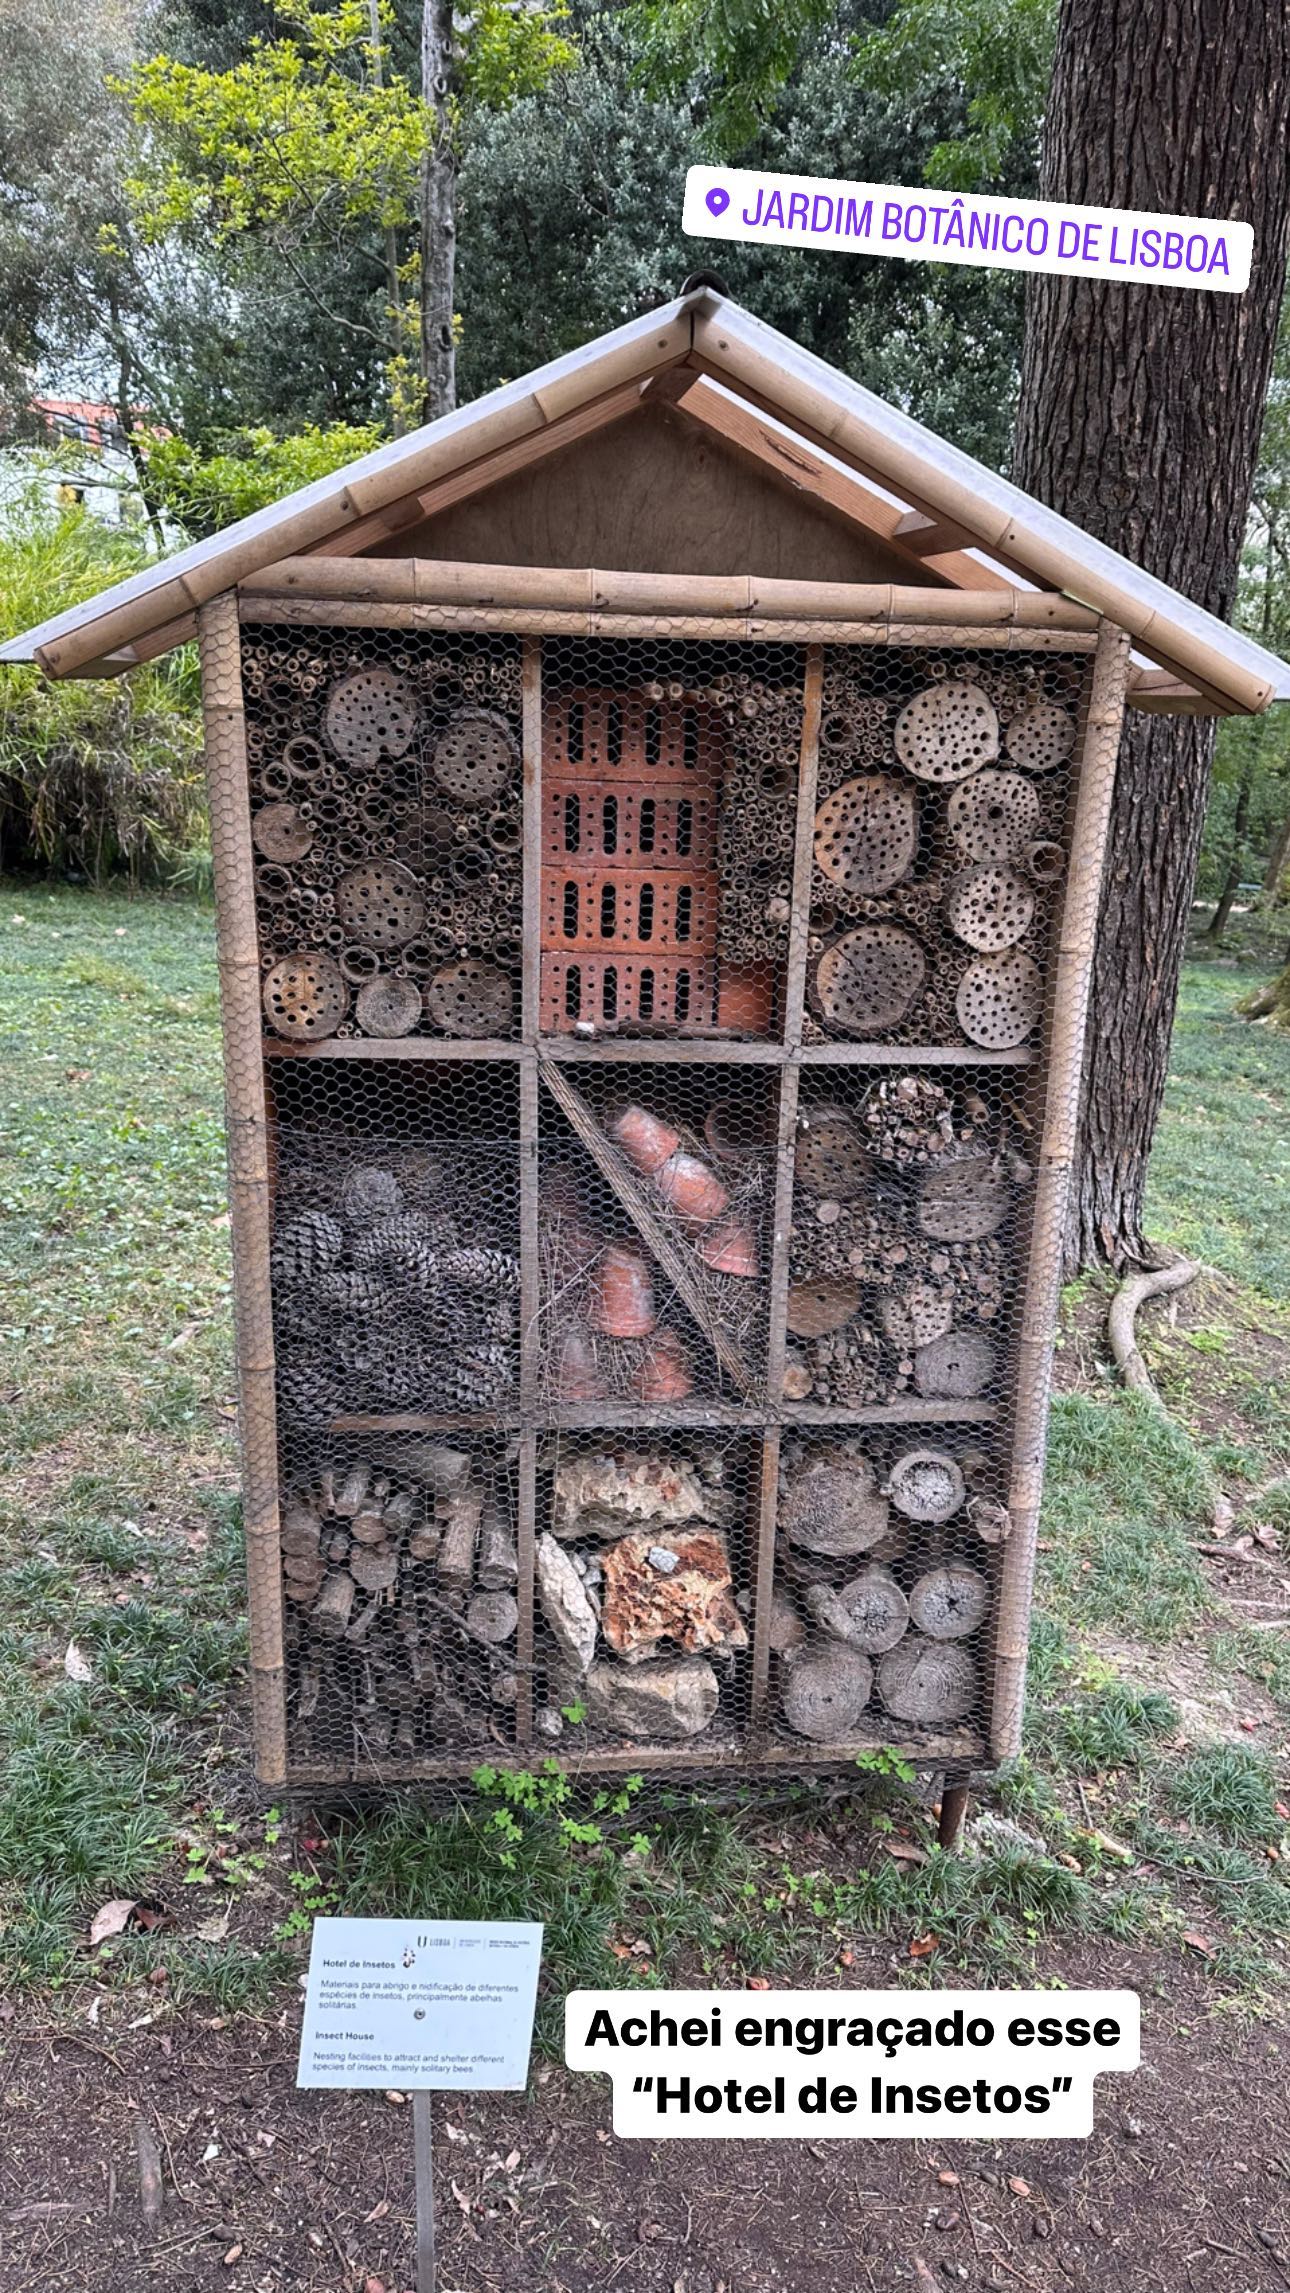 I thought this "Insect Hotel" was funny